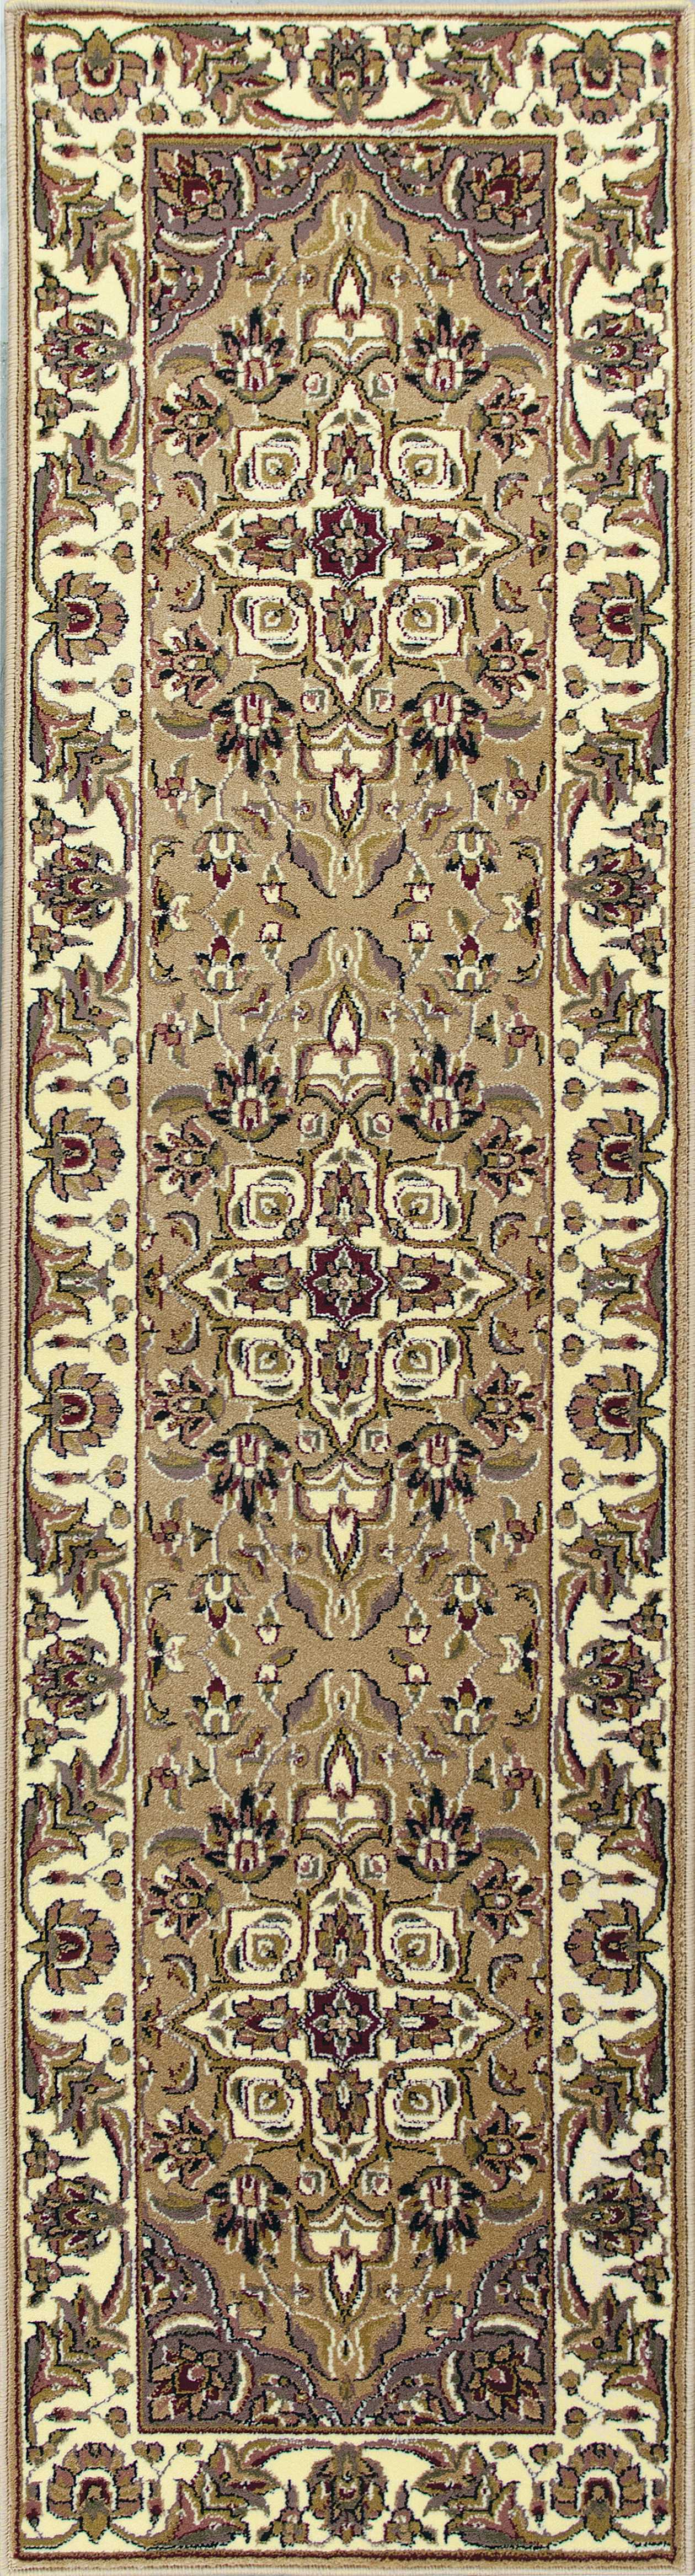 8' Beige And Ivory Area Rug